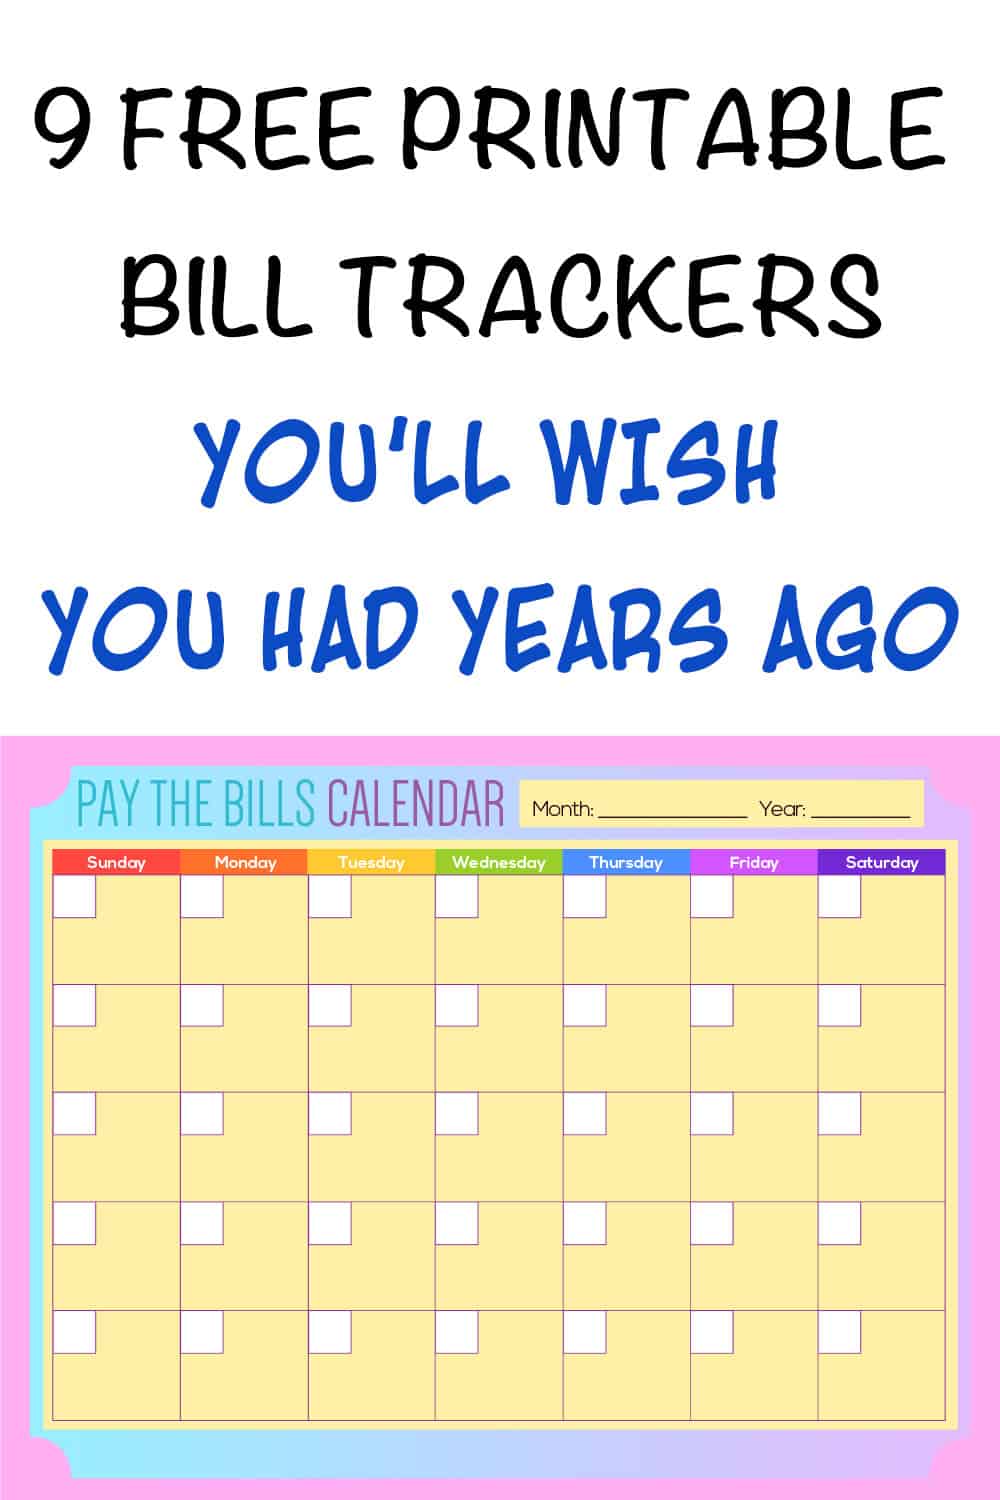 Printable Bill Payment Checklists and Bill Trackers